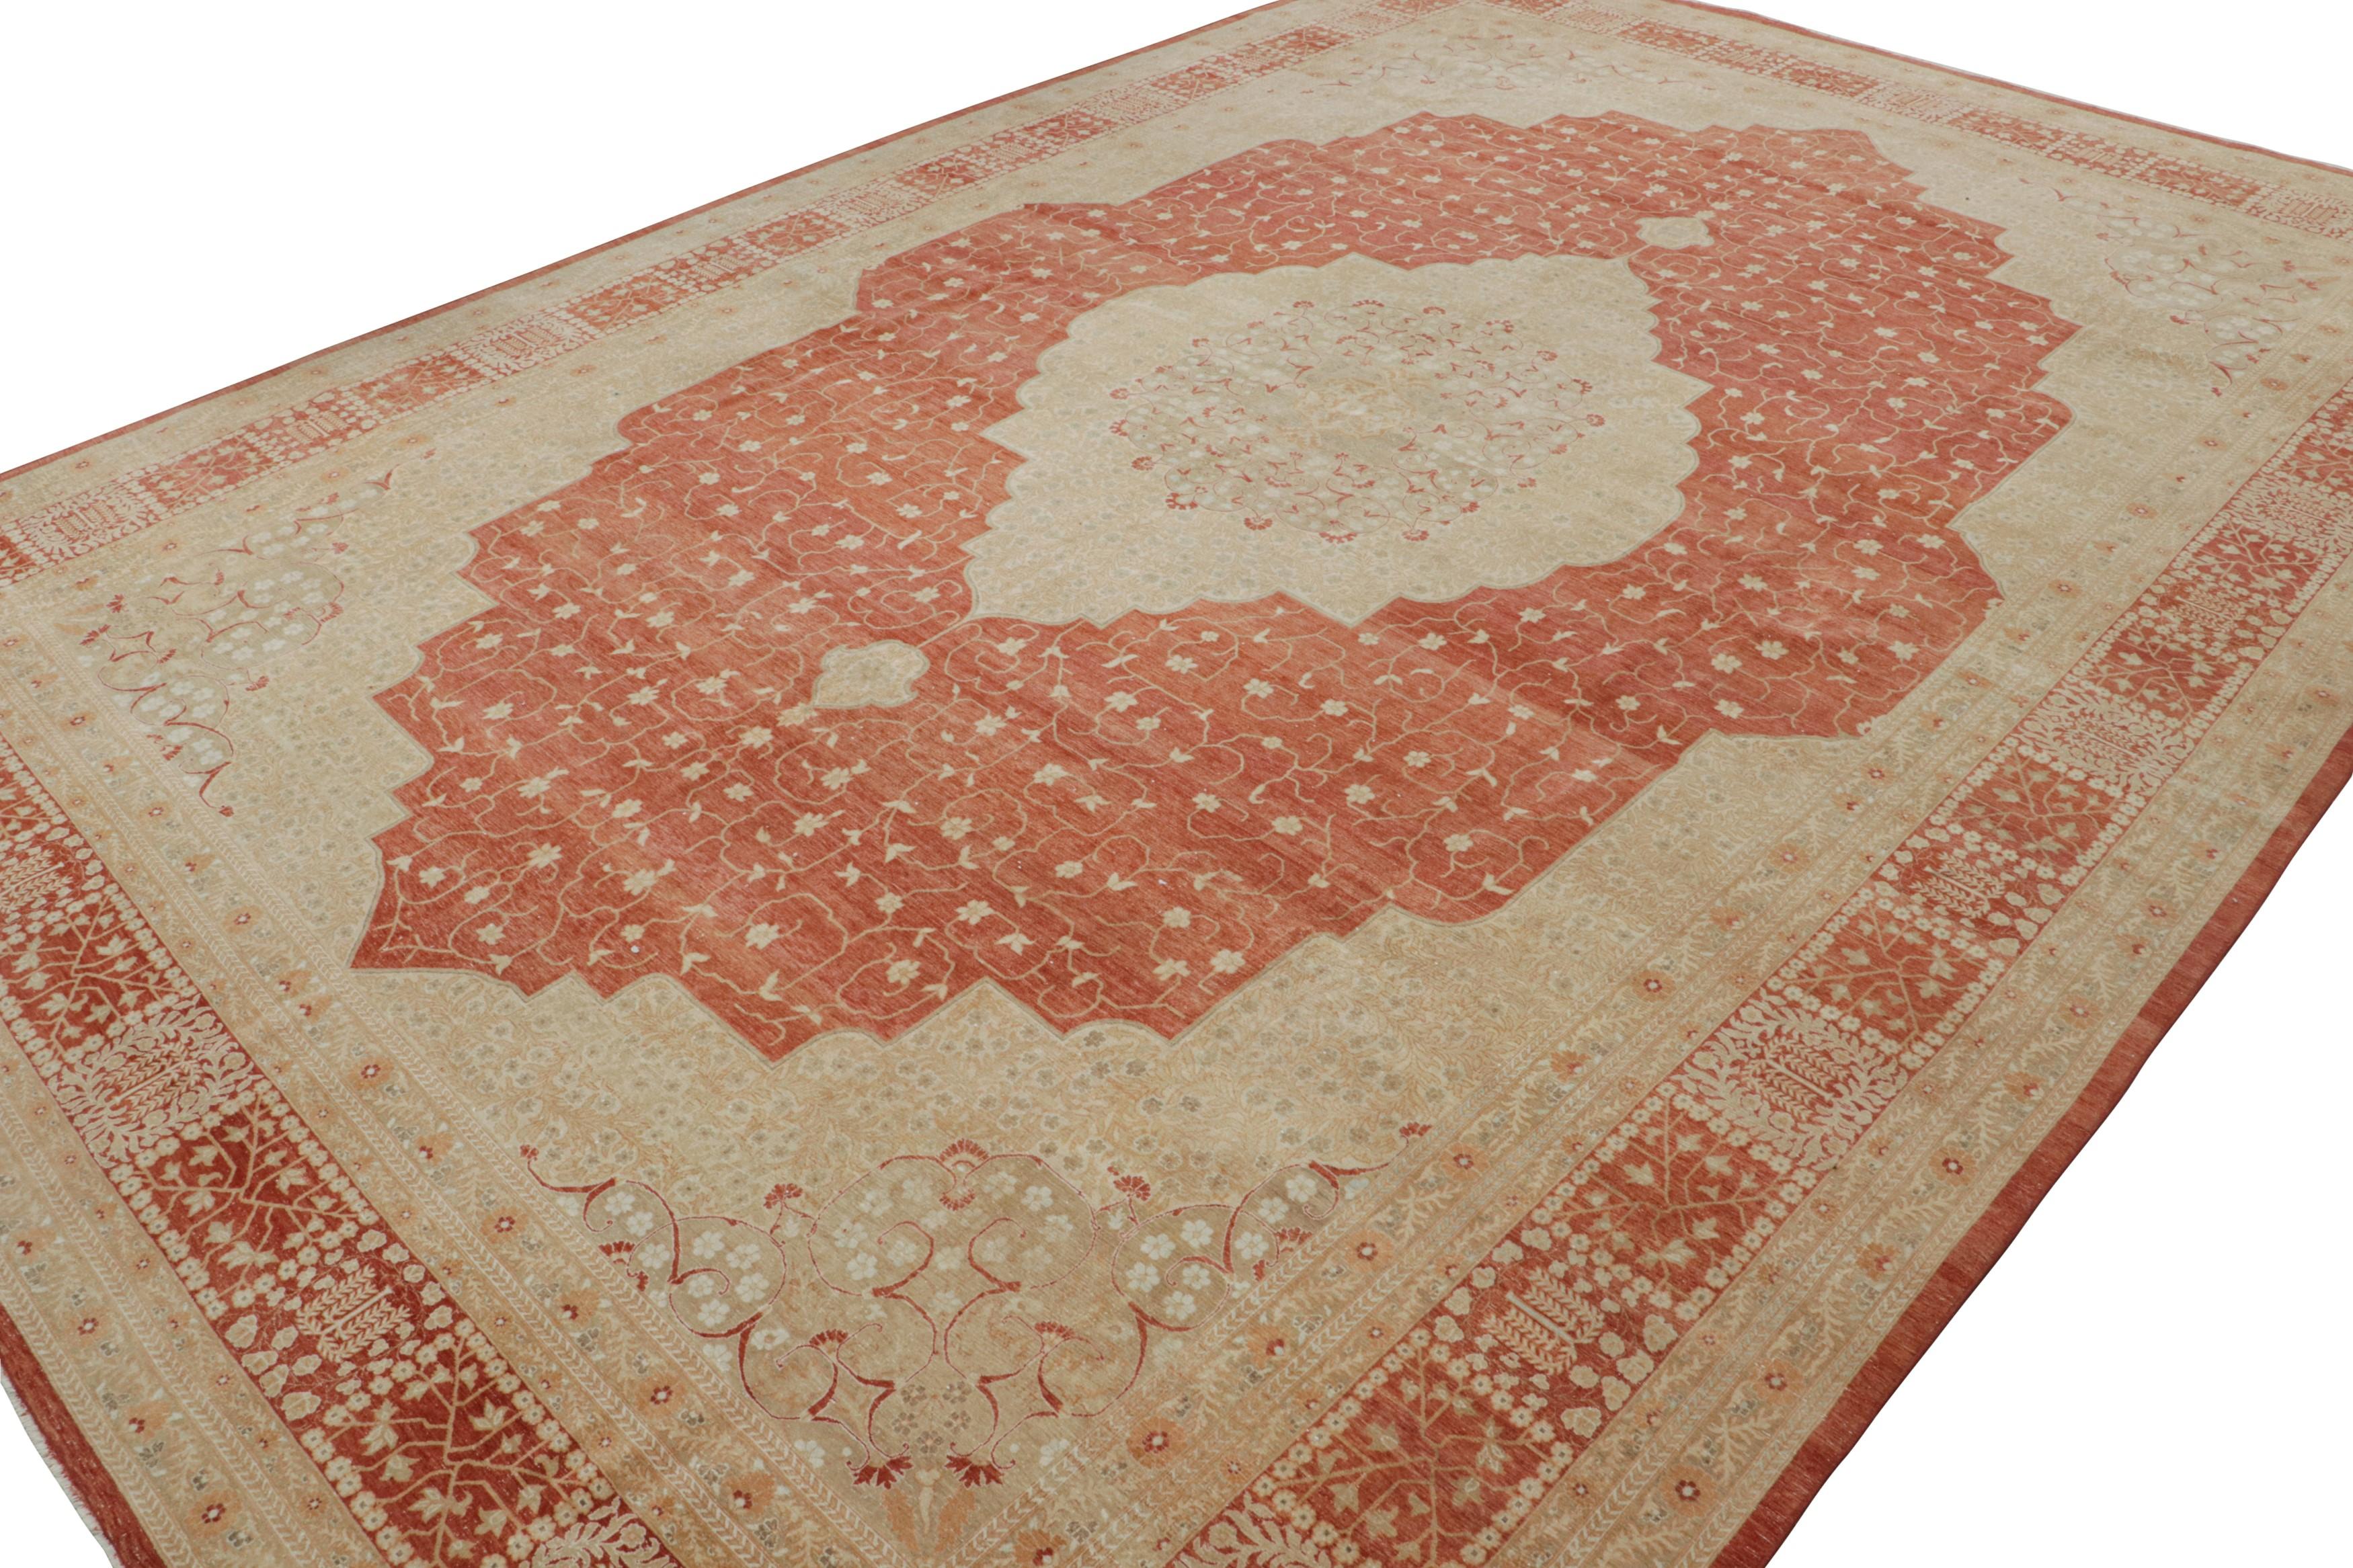 A 12 x 17 addition to the Modern Classics Collection by Rug & Kilim, hand knotted in wool drawing inspiration from the most sought-after Tabriz rug patterns like that of this regal play of red and gold with beige-brown notes.

Further on the